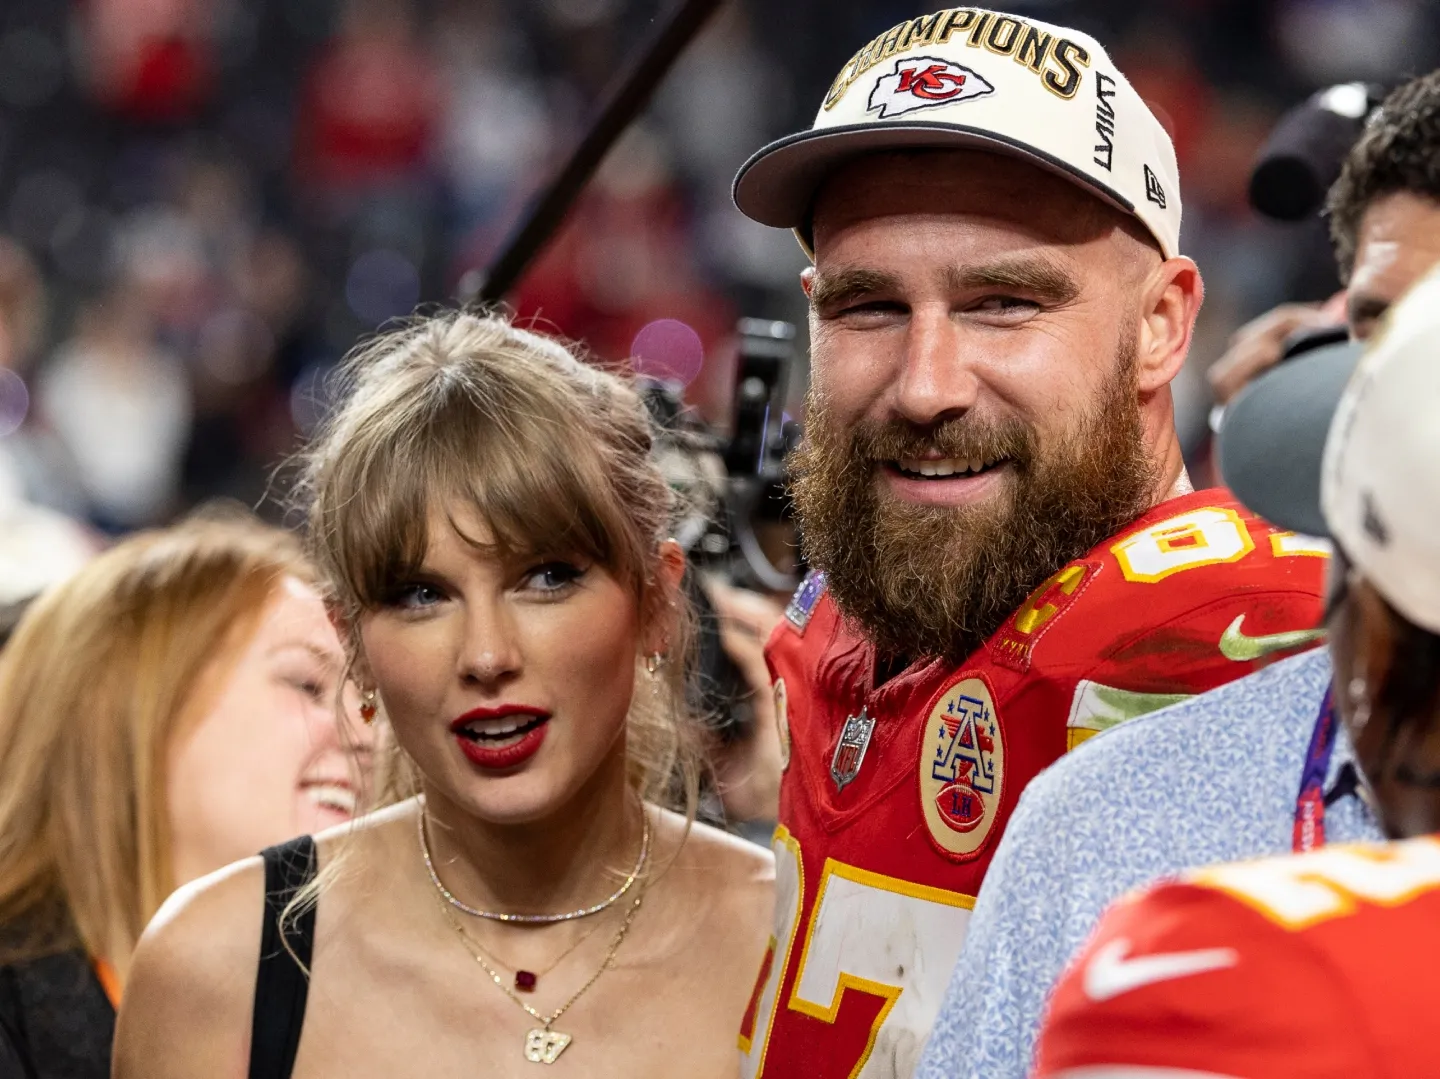 Chiefs’ James Winchester Recalls Travis Kelce ‘Smiling and Blushing’ When Taylor Swift Attended First Game, Winchester also revealed the first thing Swift said to him when they met after the Chiefs game on Sept. 24